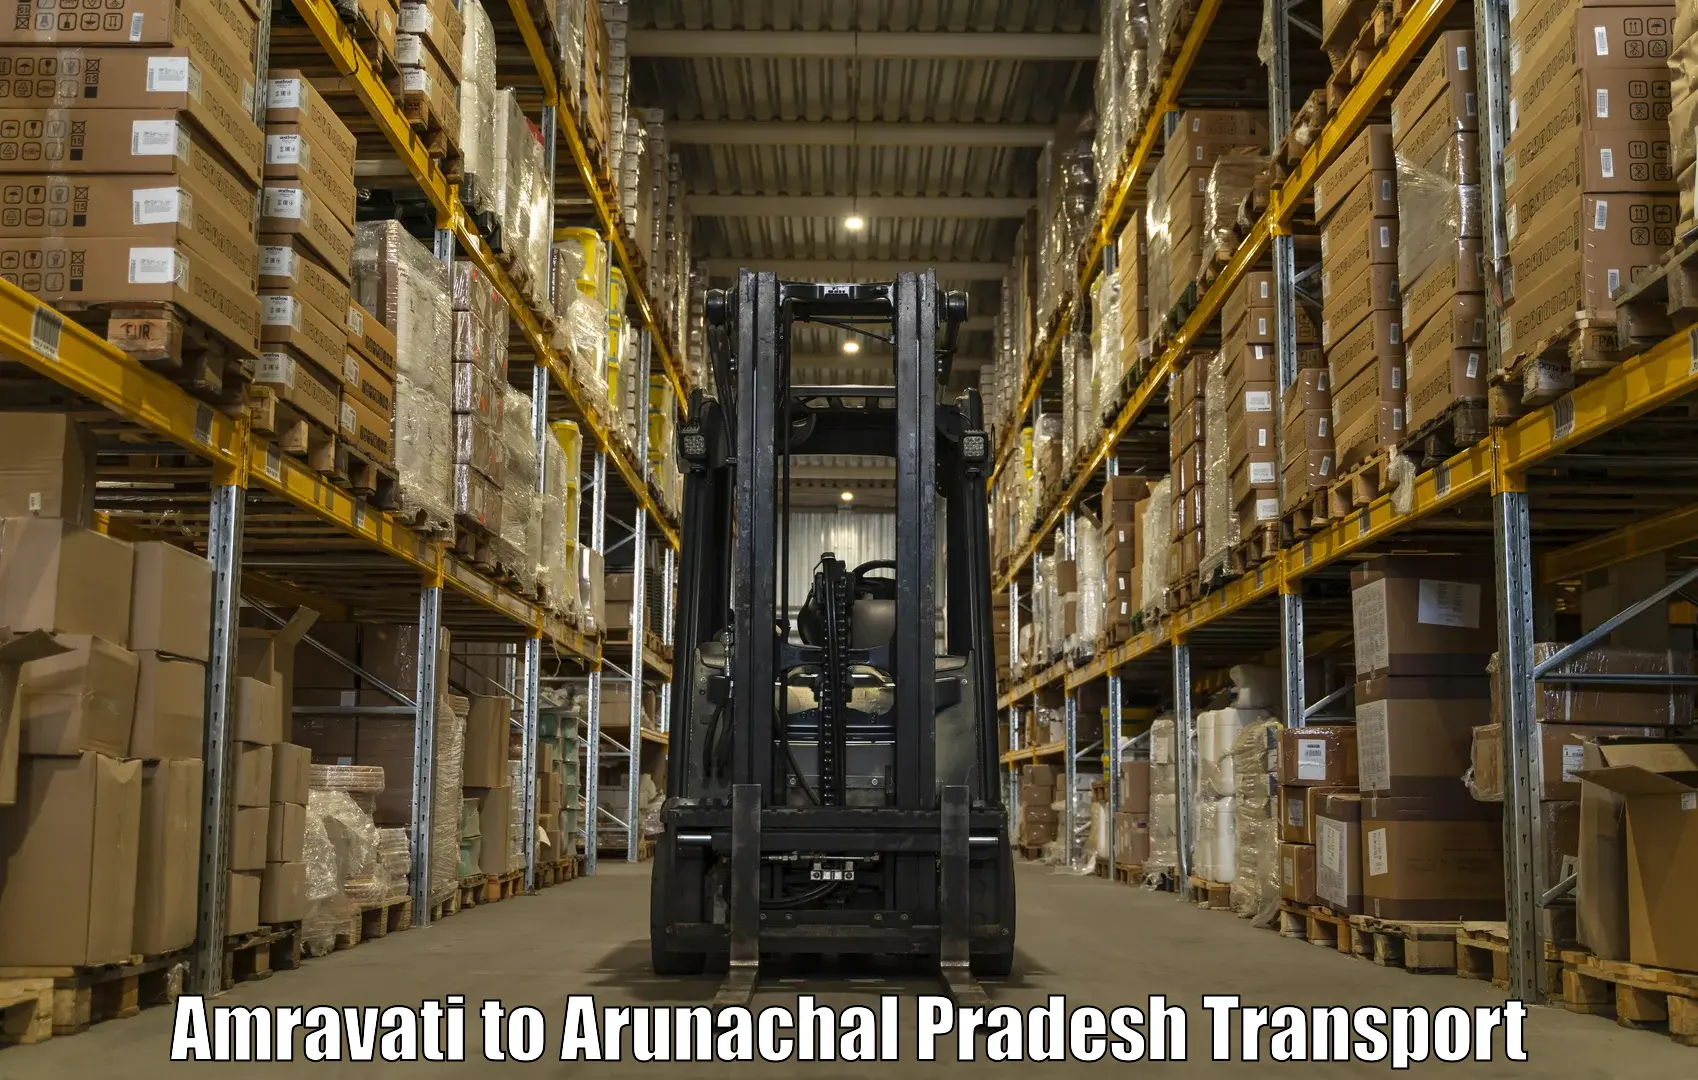 Transport shared services in Amravati to Lower Dibang Valley